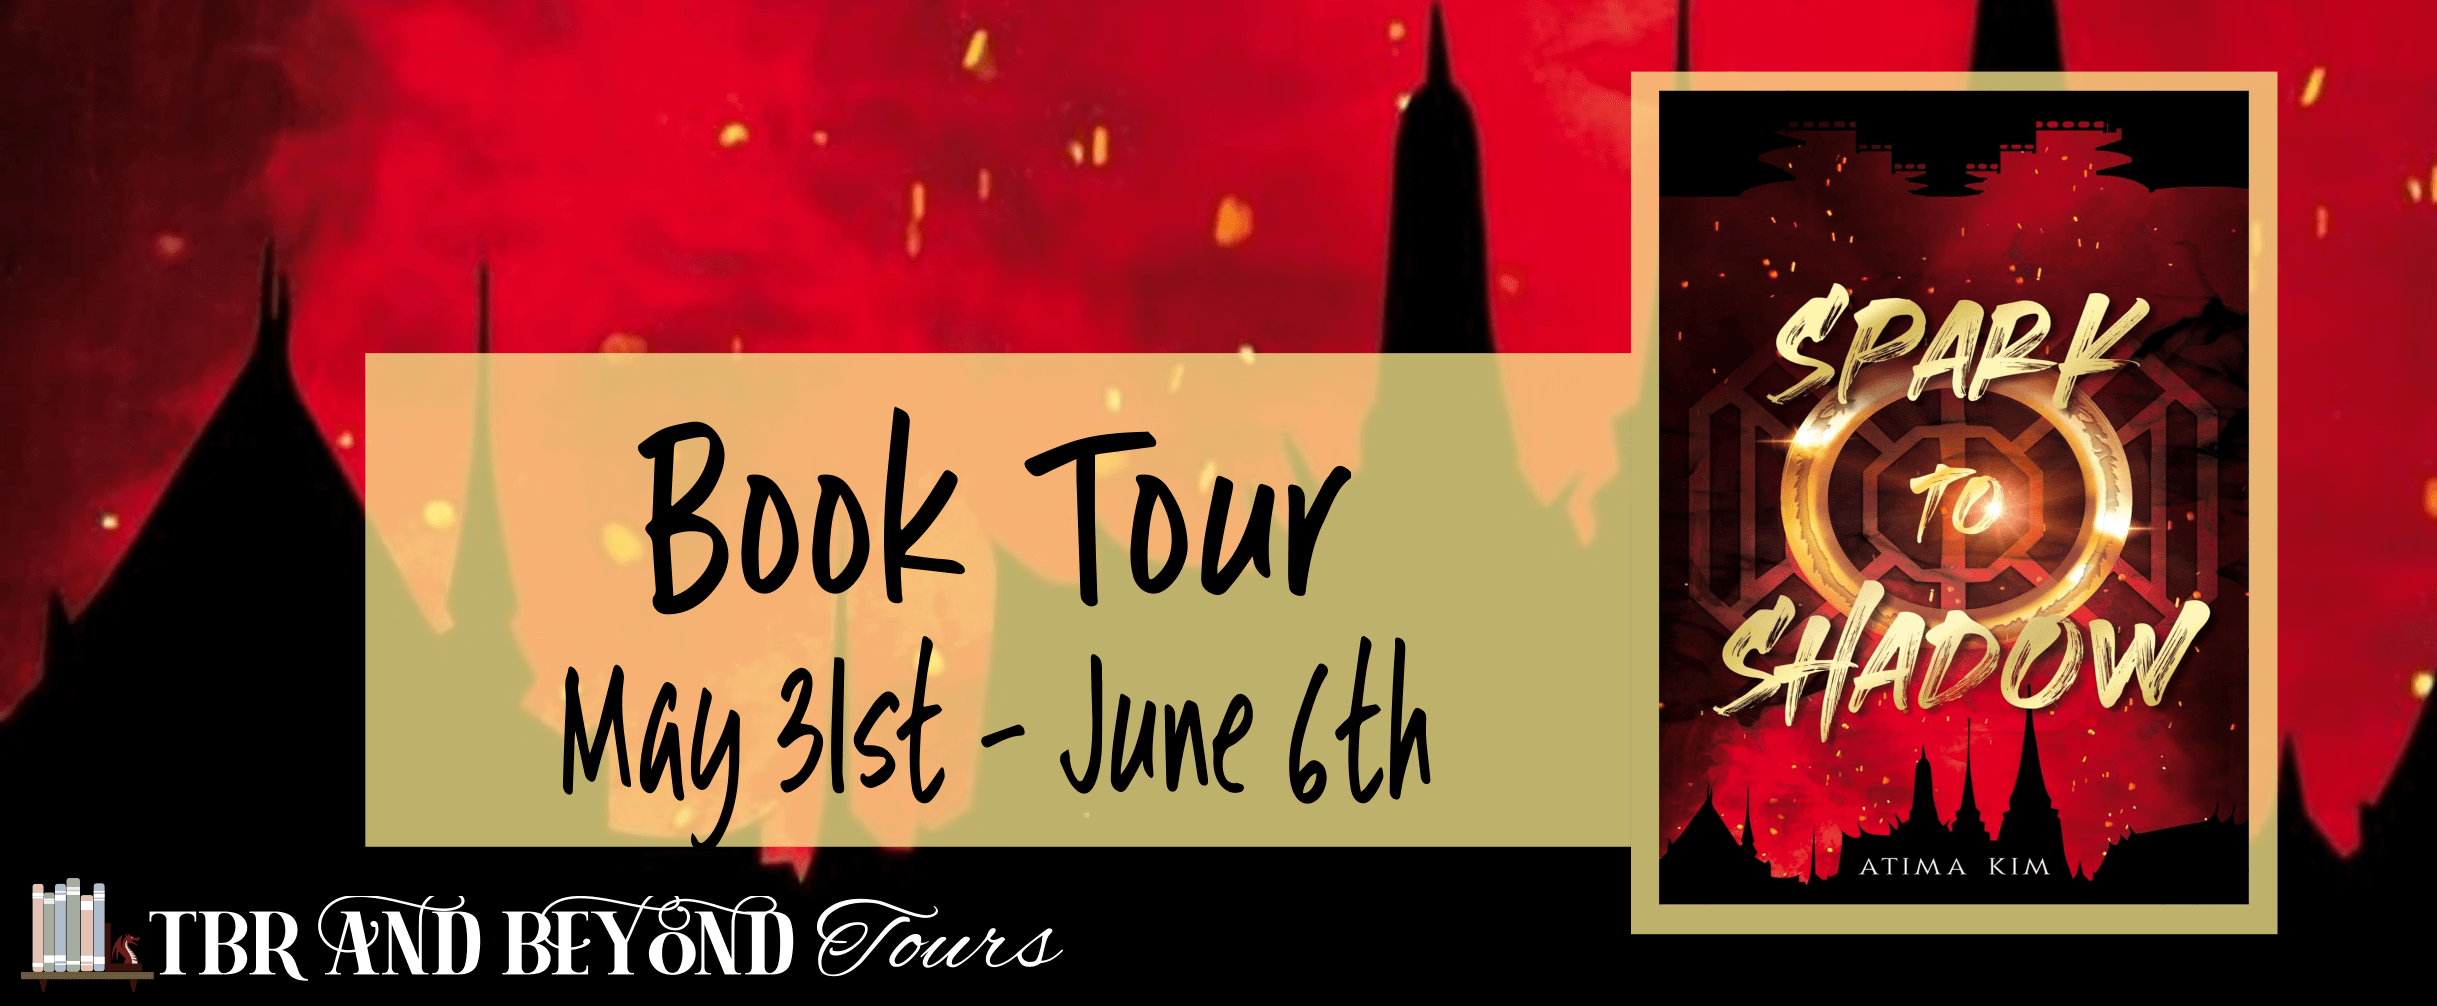 Spark to Shadow - TBR & Beyond Blog Tour: Review and 5 reasons why it should be your next read!